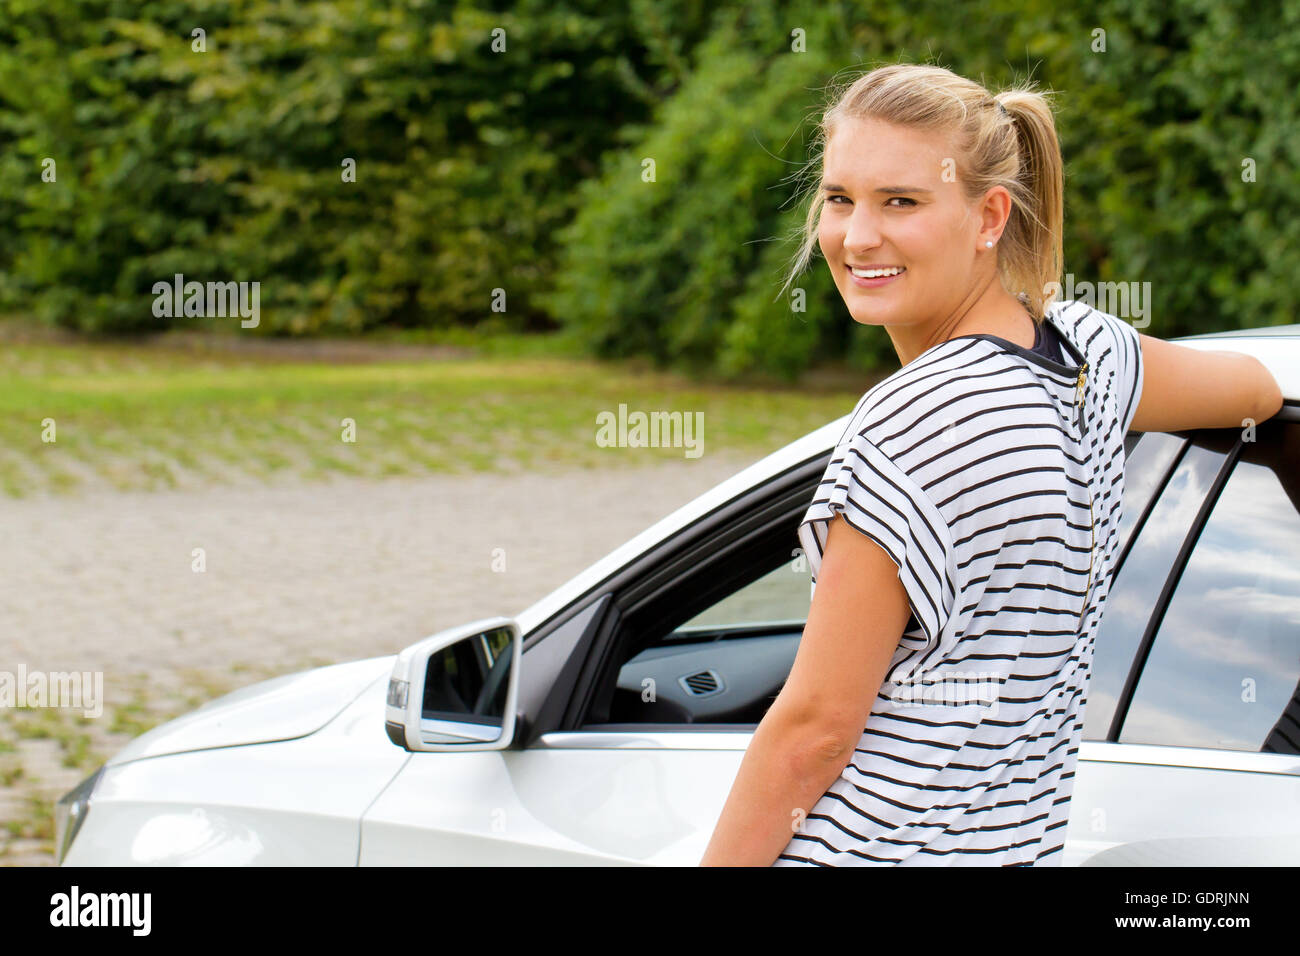 Young woman standing by her new car Stock Photo